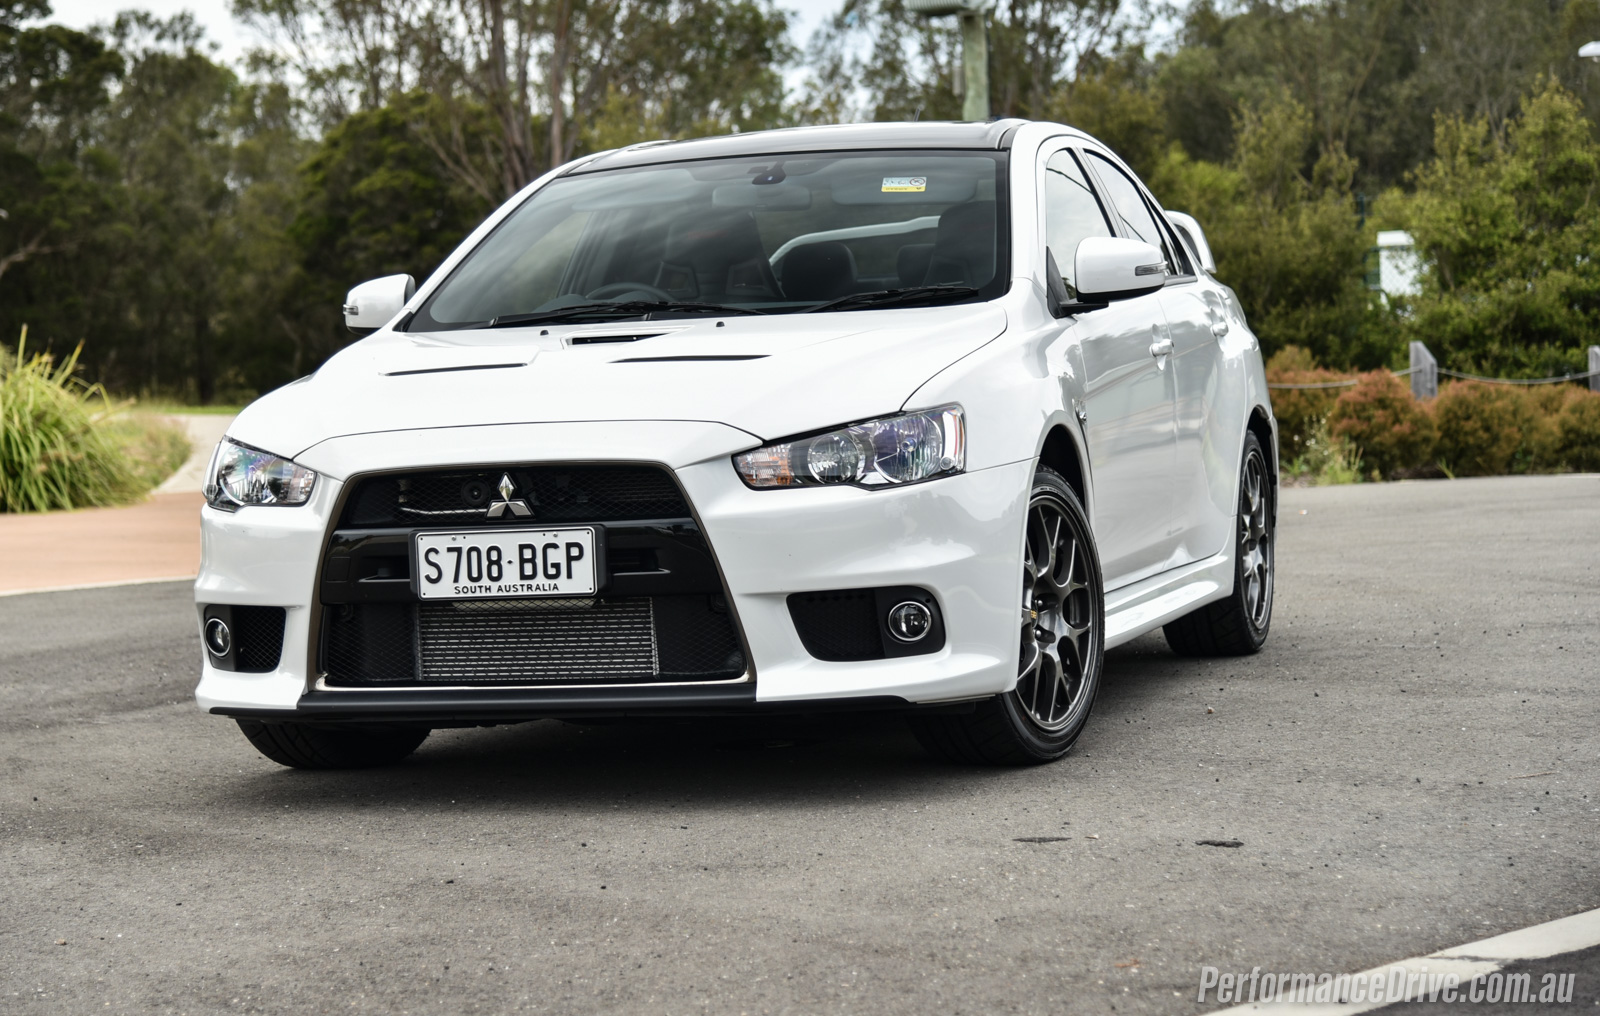 10 things we'll miss most about the Mitsubishi Evo X